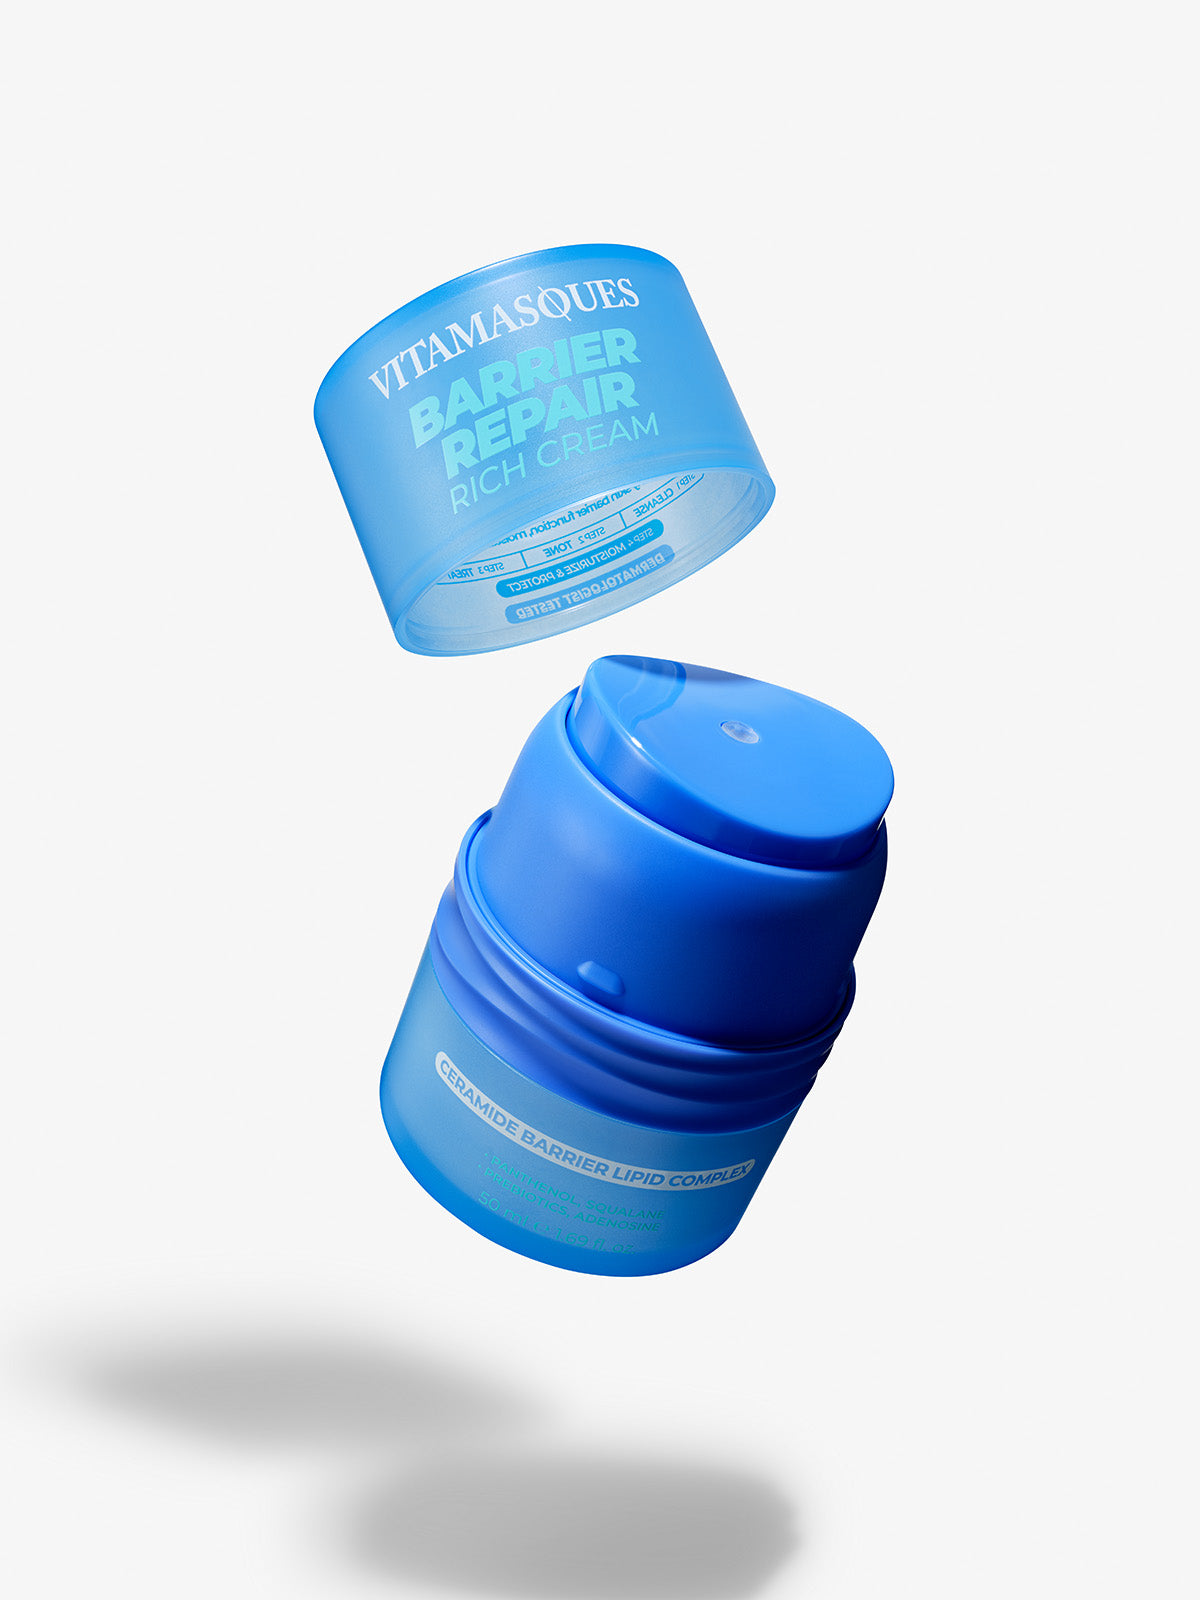 Vitamasques Barrier Repair Rich Cream with ceramide and lipid complex, designed to restore and strengthen the skin's protective barrier. Blue airless pump container with the lid open.